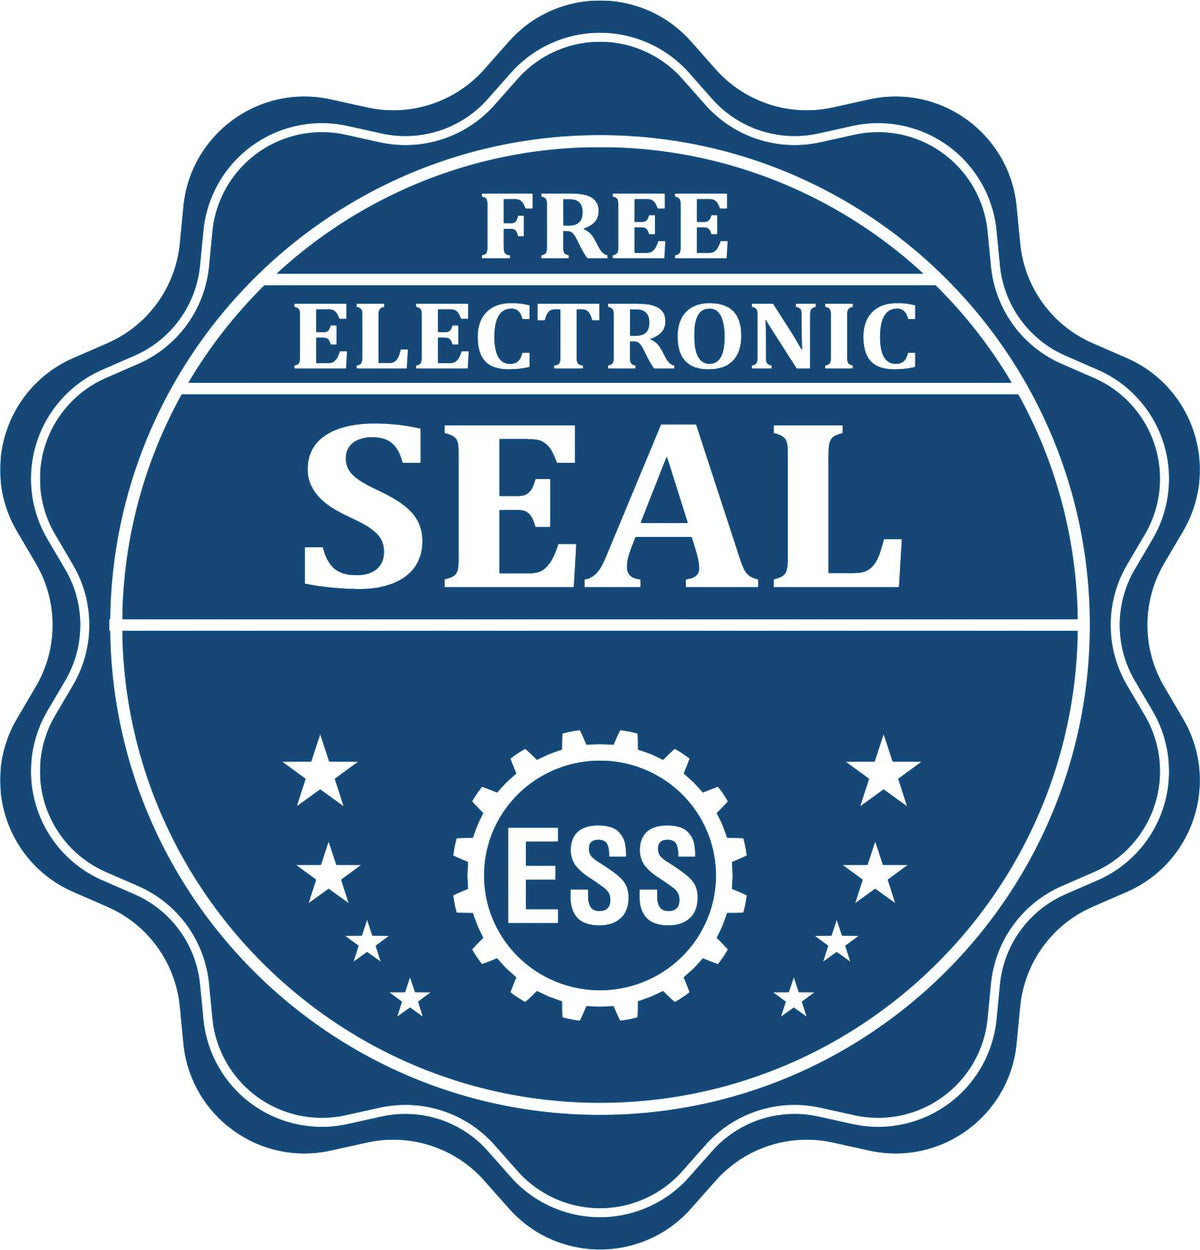 A badge showing a free electronic seal for the Slim Pre-Inked Pennsylvania Land Surveyor Seal Stamp with stars and the ESS gear on the emblem.